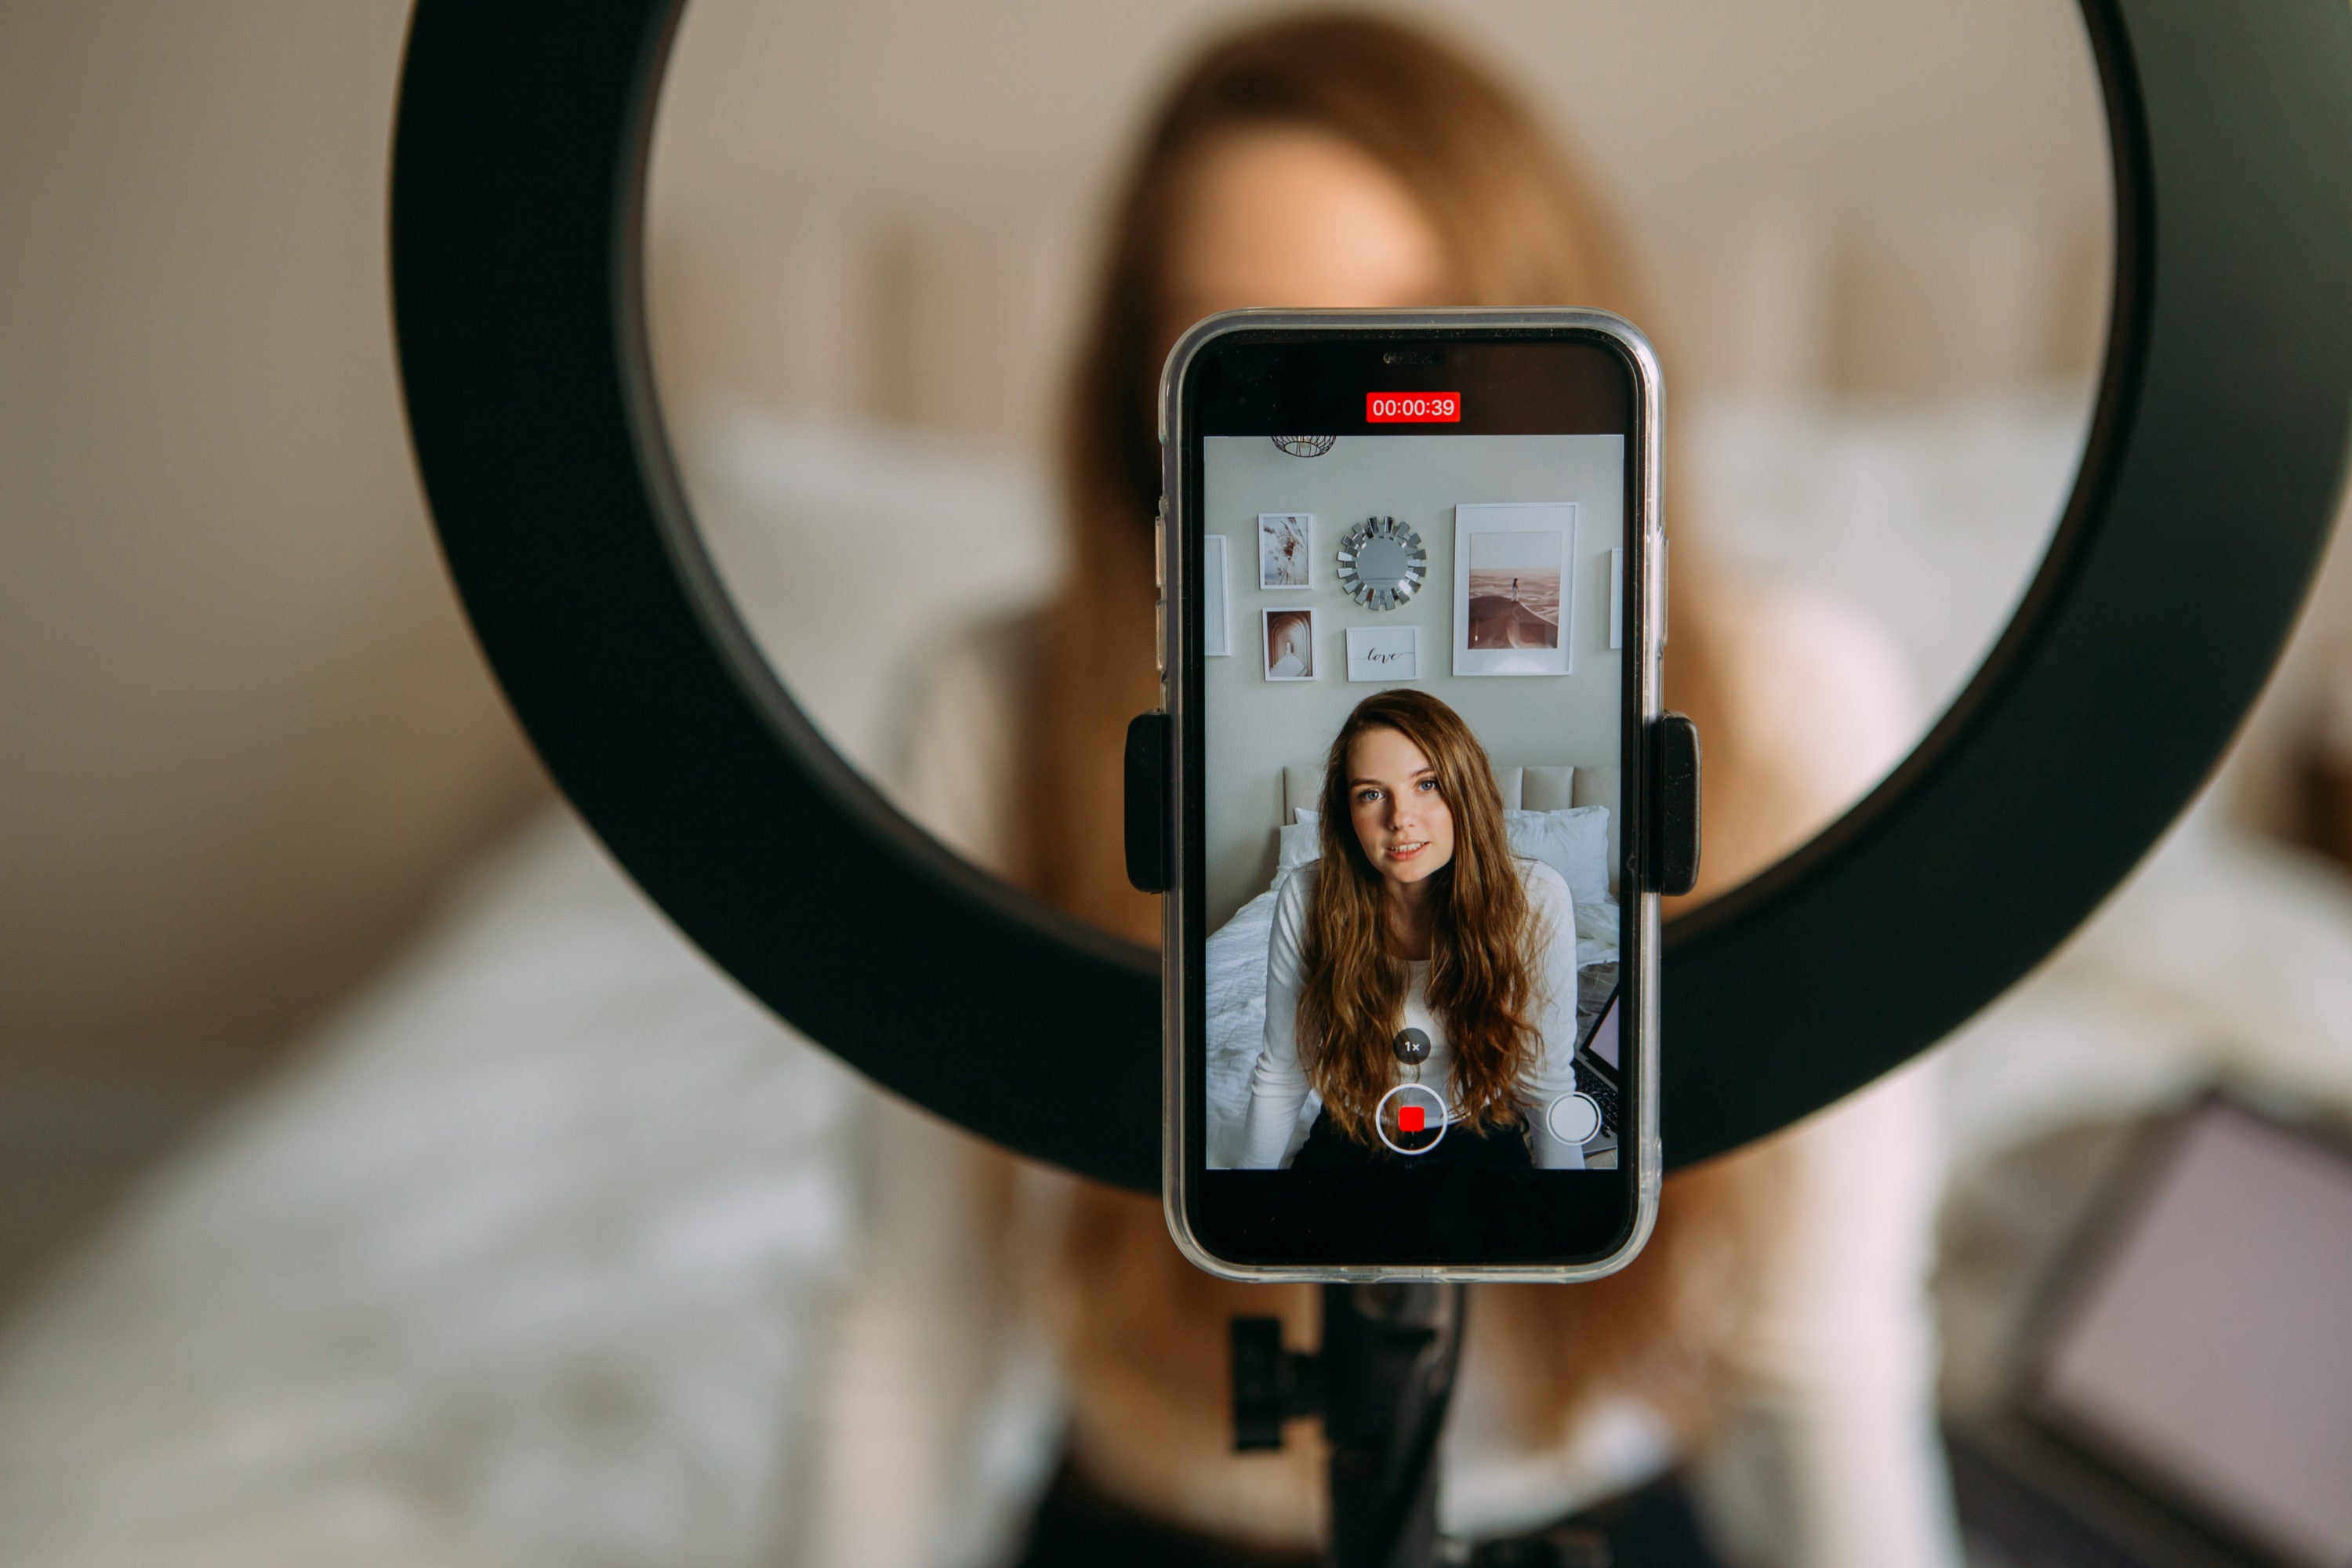 stock-photo-young-woman-records-video-on-phone-phone-on-tripod-with-led-lamp-1037762092-3000x2000.jpg__PID:5b015214-6258-4db2-acd4-9efd328cc570